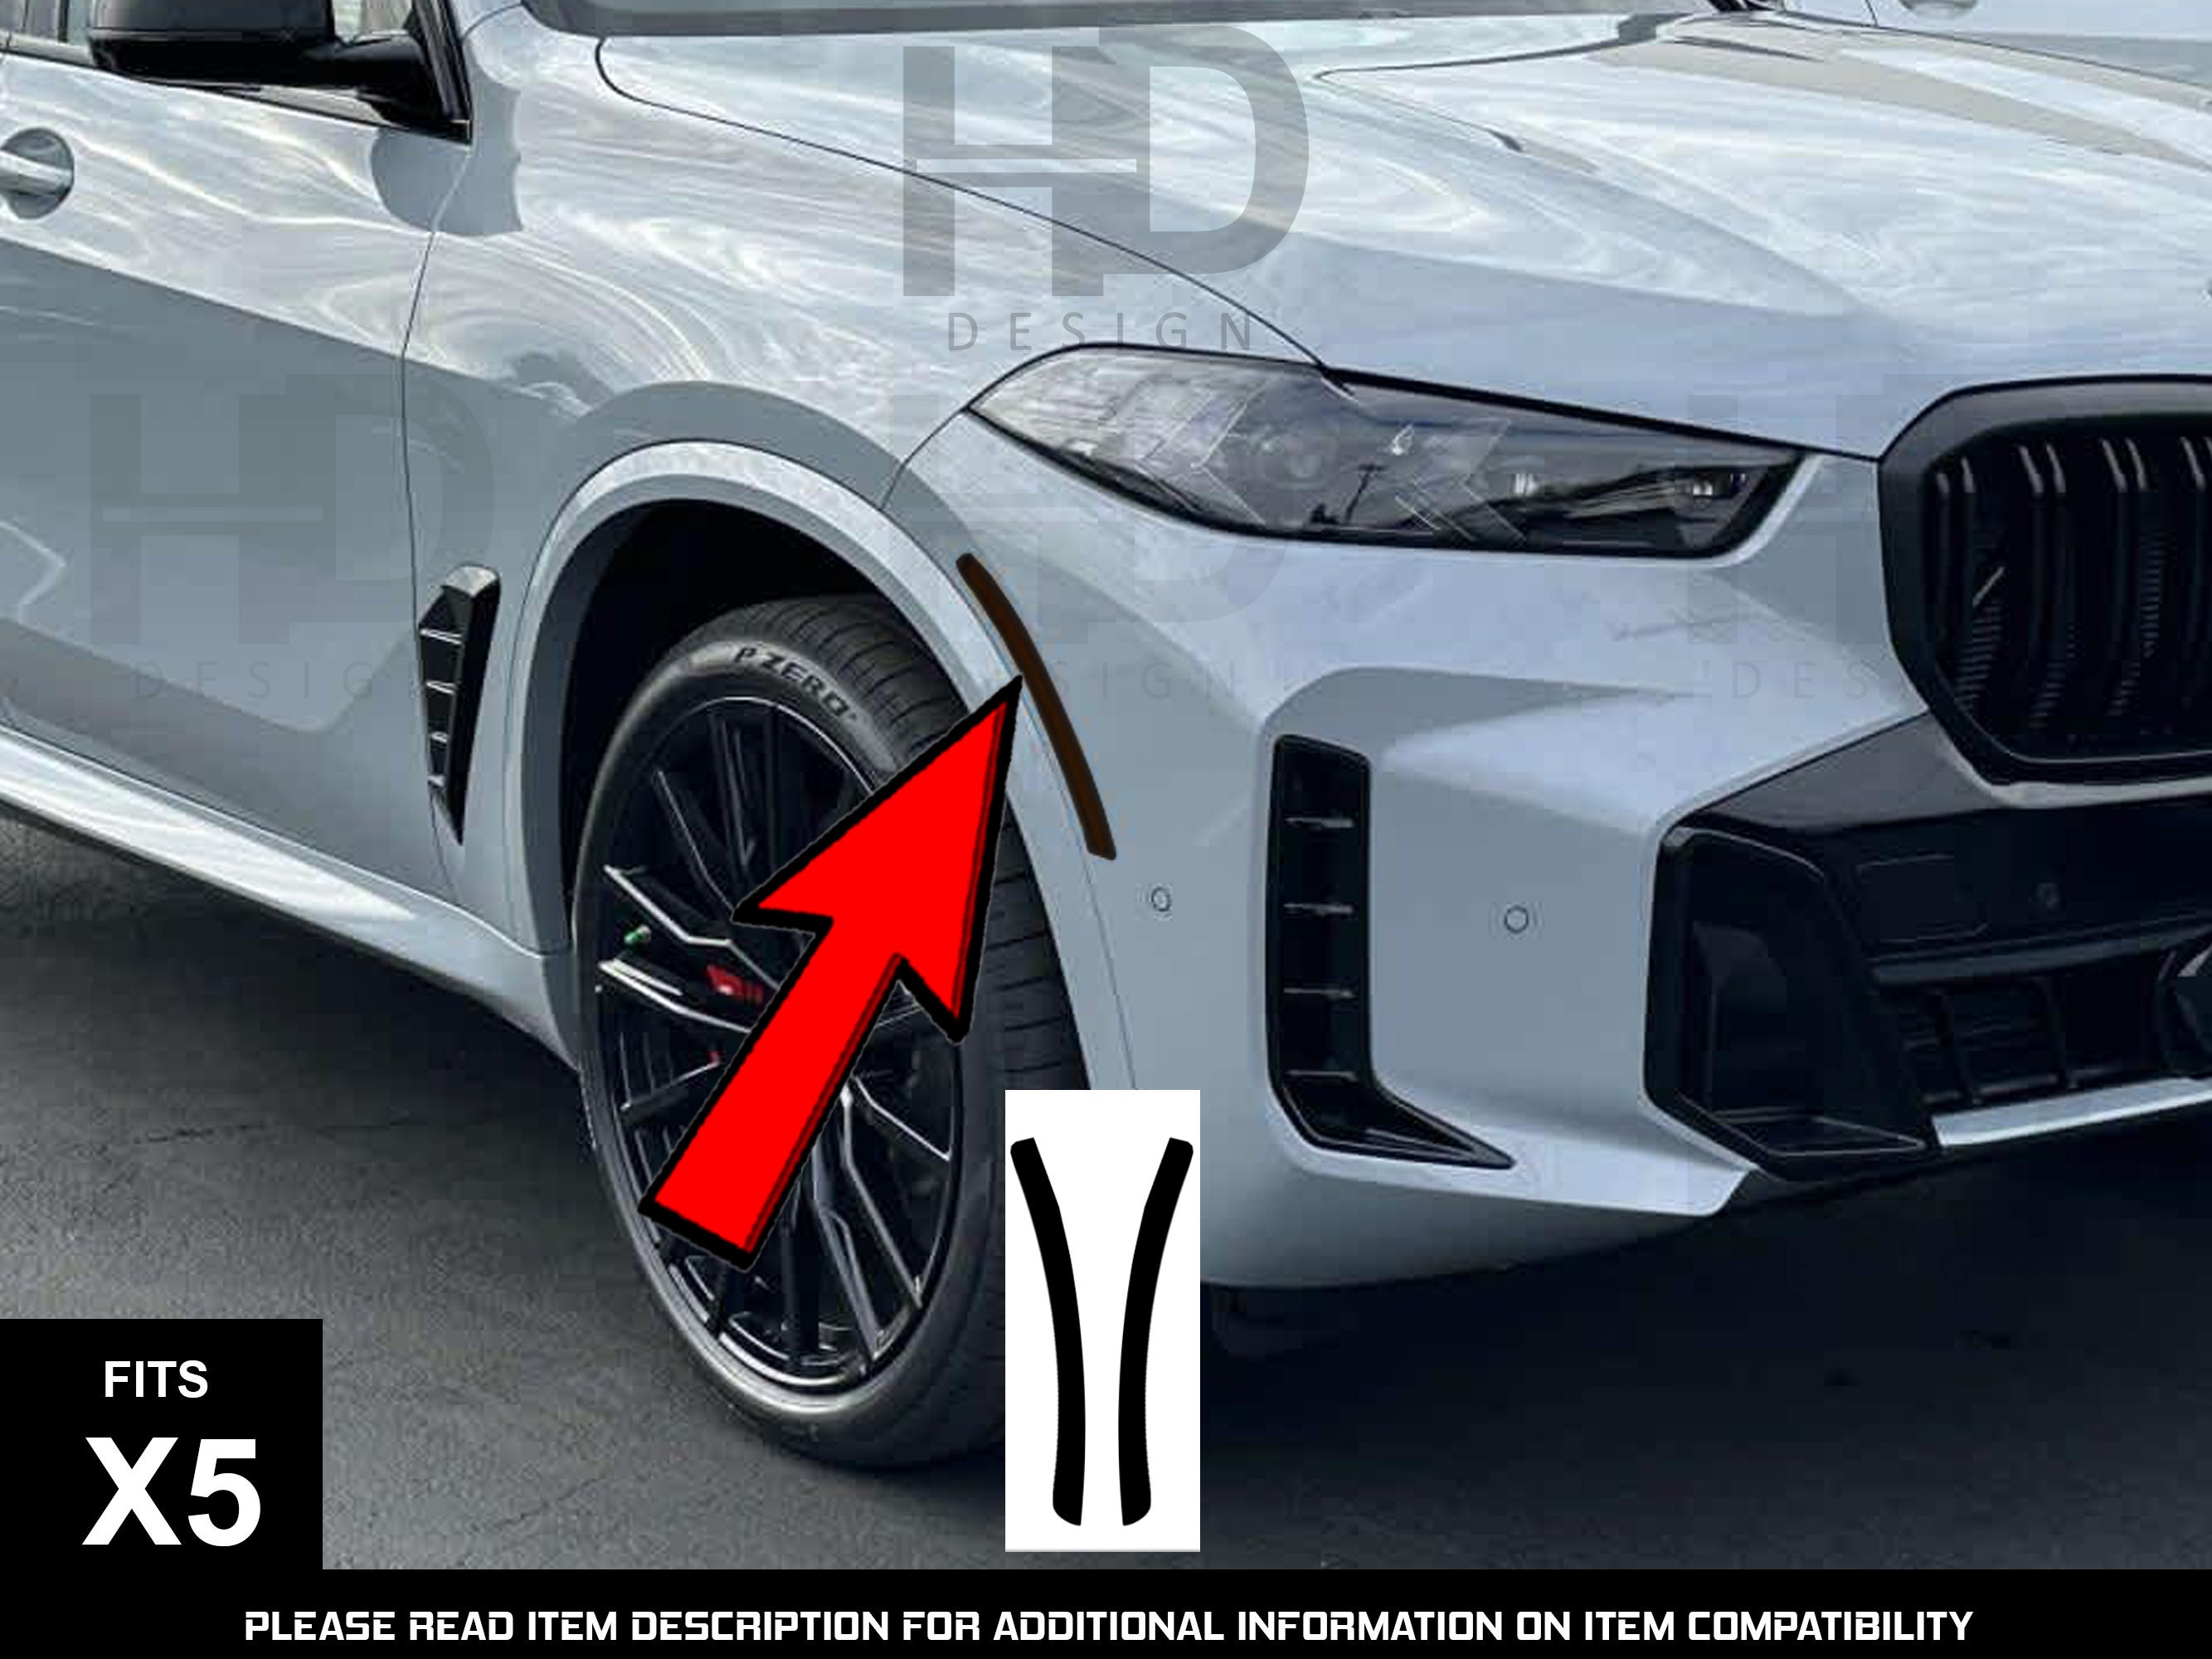 2014 BMW X5 (F15) Interior Seen in More Detail (Fully Bared) - BMW X5 and  X6 Forum (F15/F16)